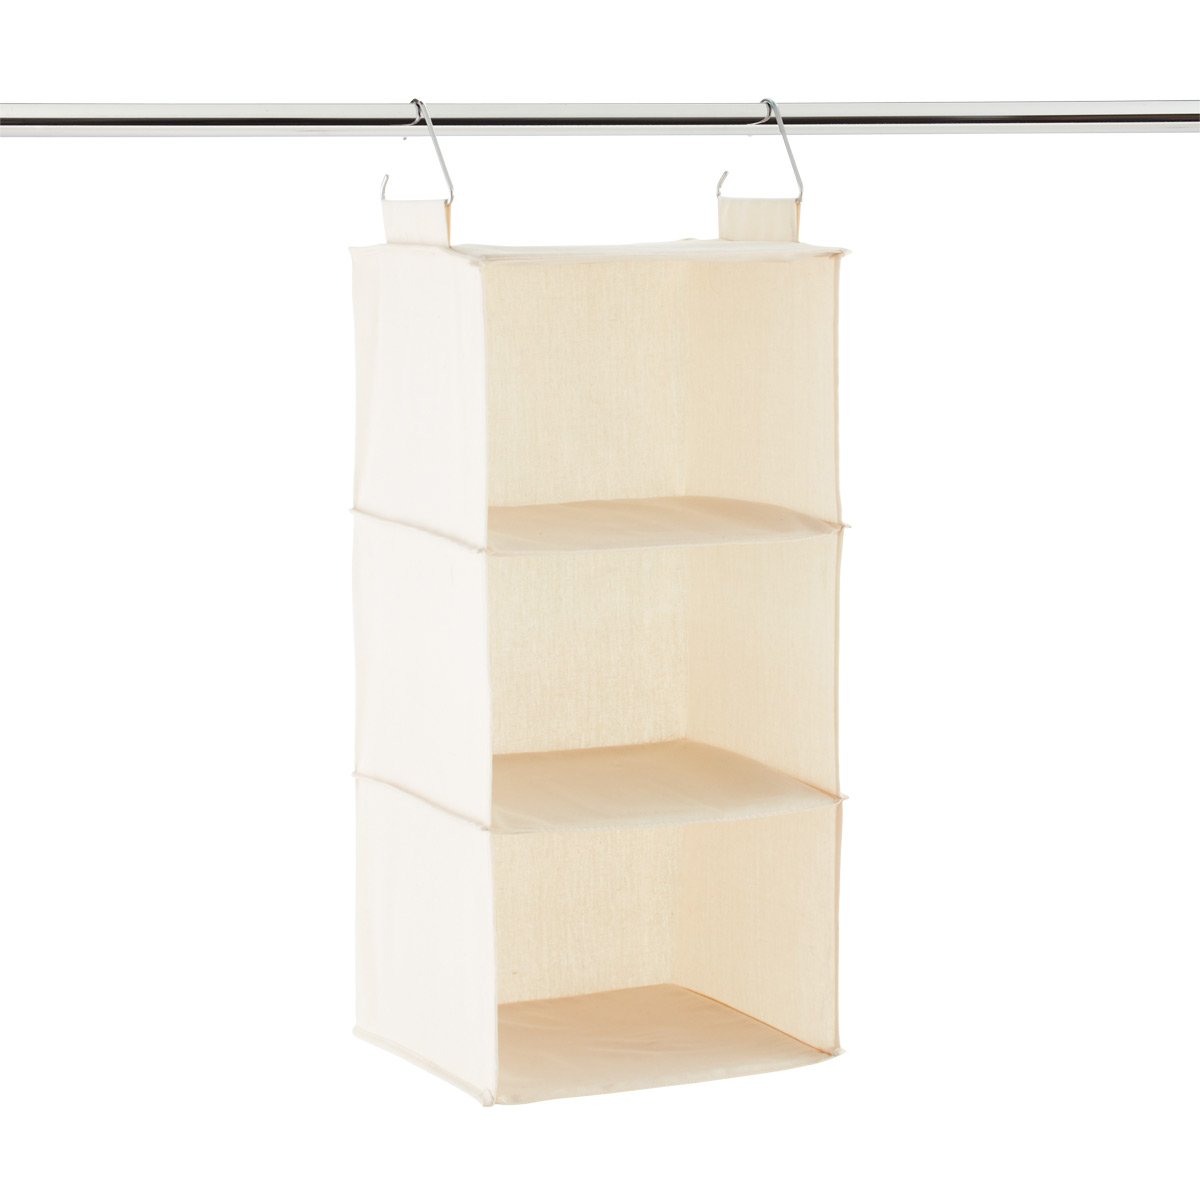 https://www.containerstore.com/catalogimages/314407/10071573-hanging-canvas-organizer-3-.jpg